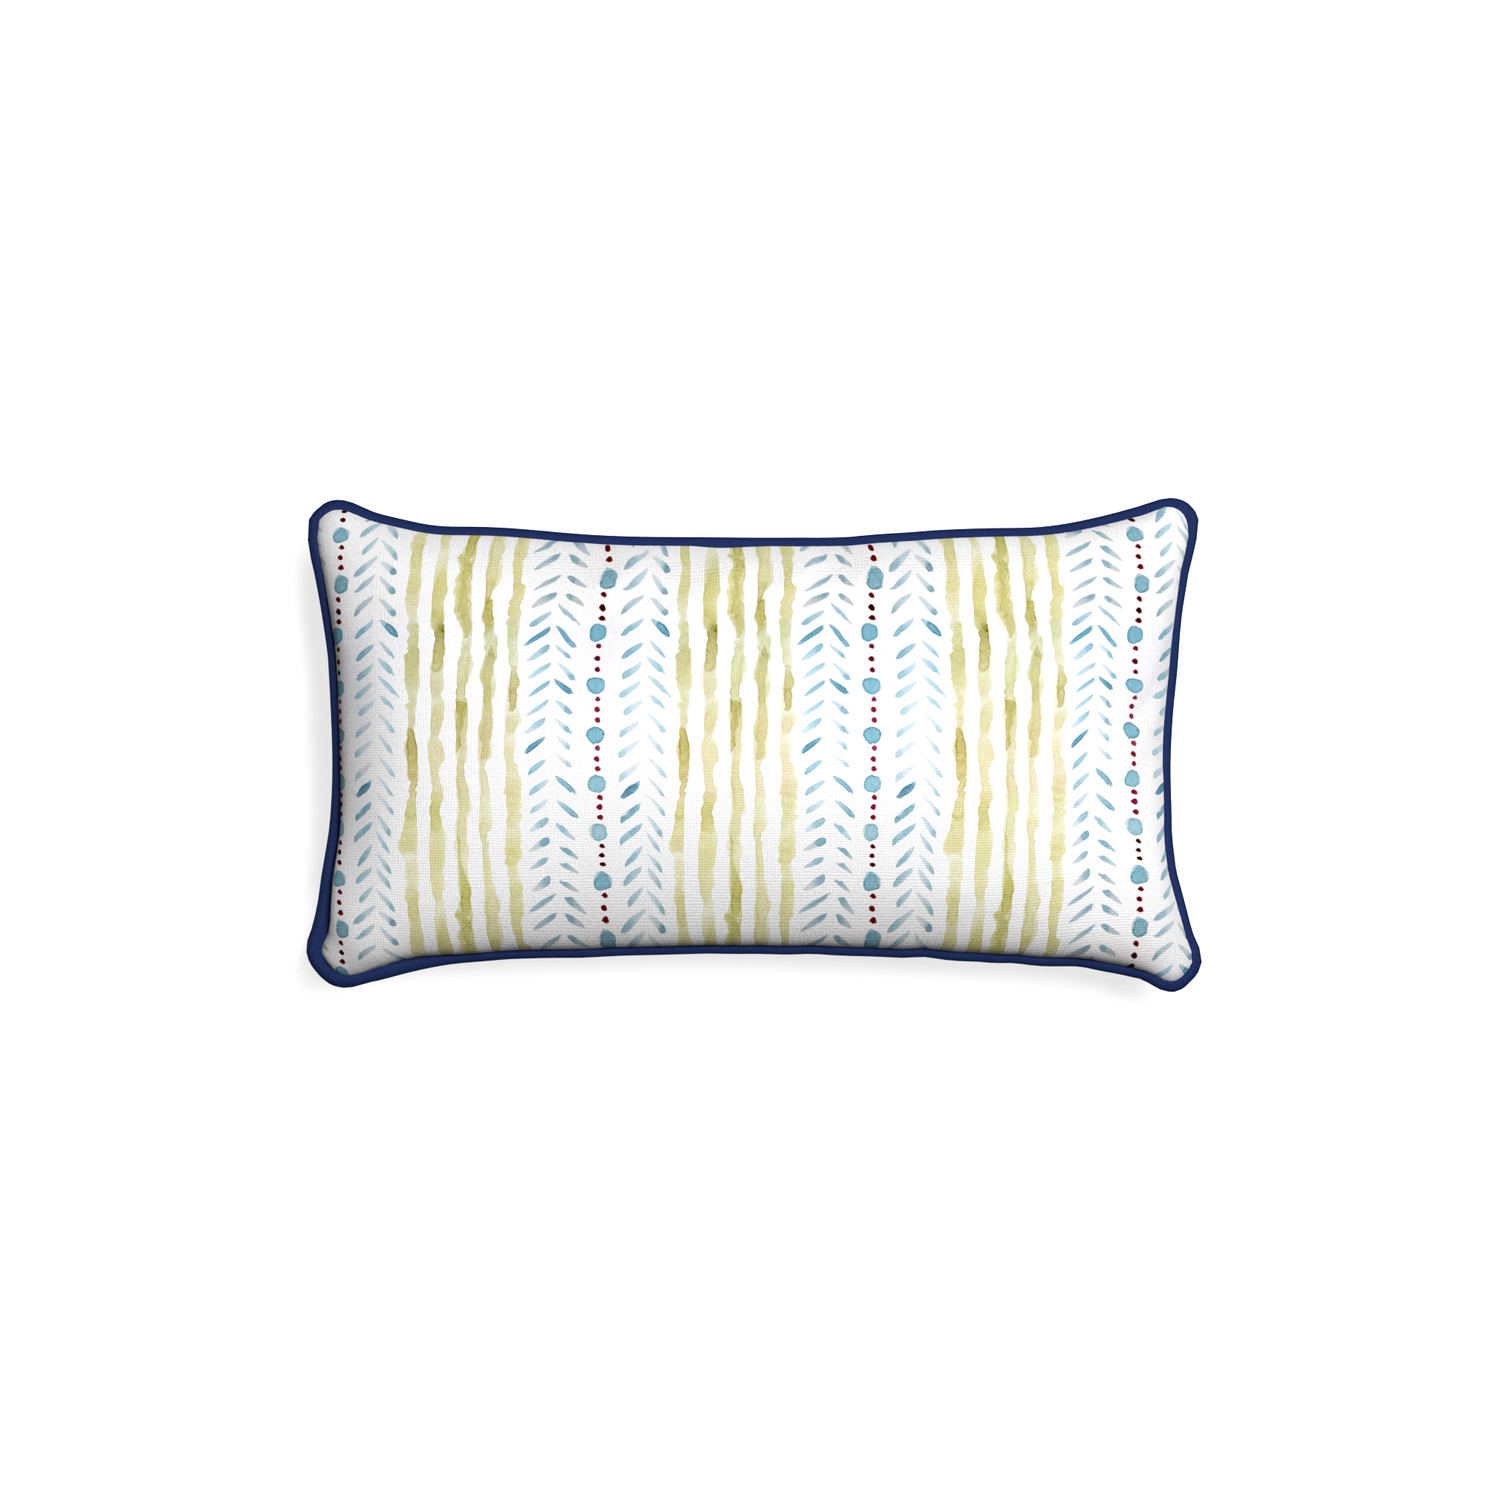 Petite-lumbar julia custom blue & green stripedpillow with midnight piping on white background